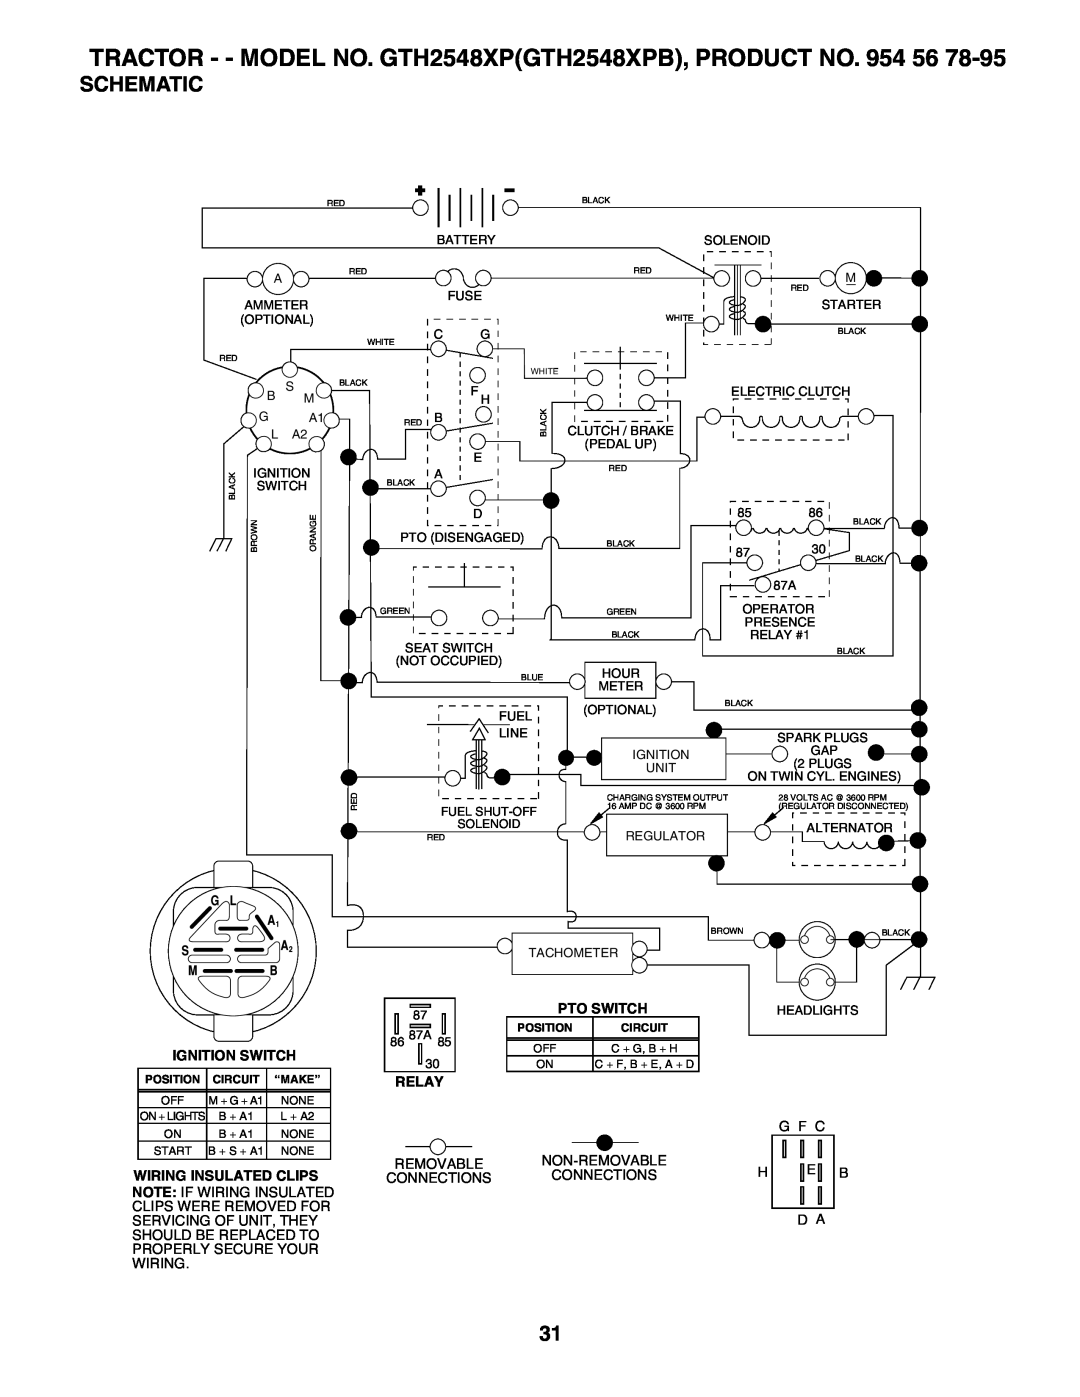 Husqvarna GTH2548XP owner manual Schematic, Ignition Switch, Wiring Insulated Clips, Relay, Pto Switch 